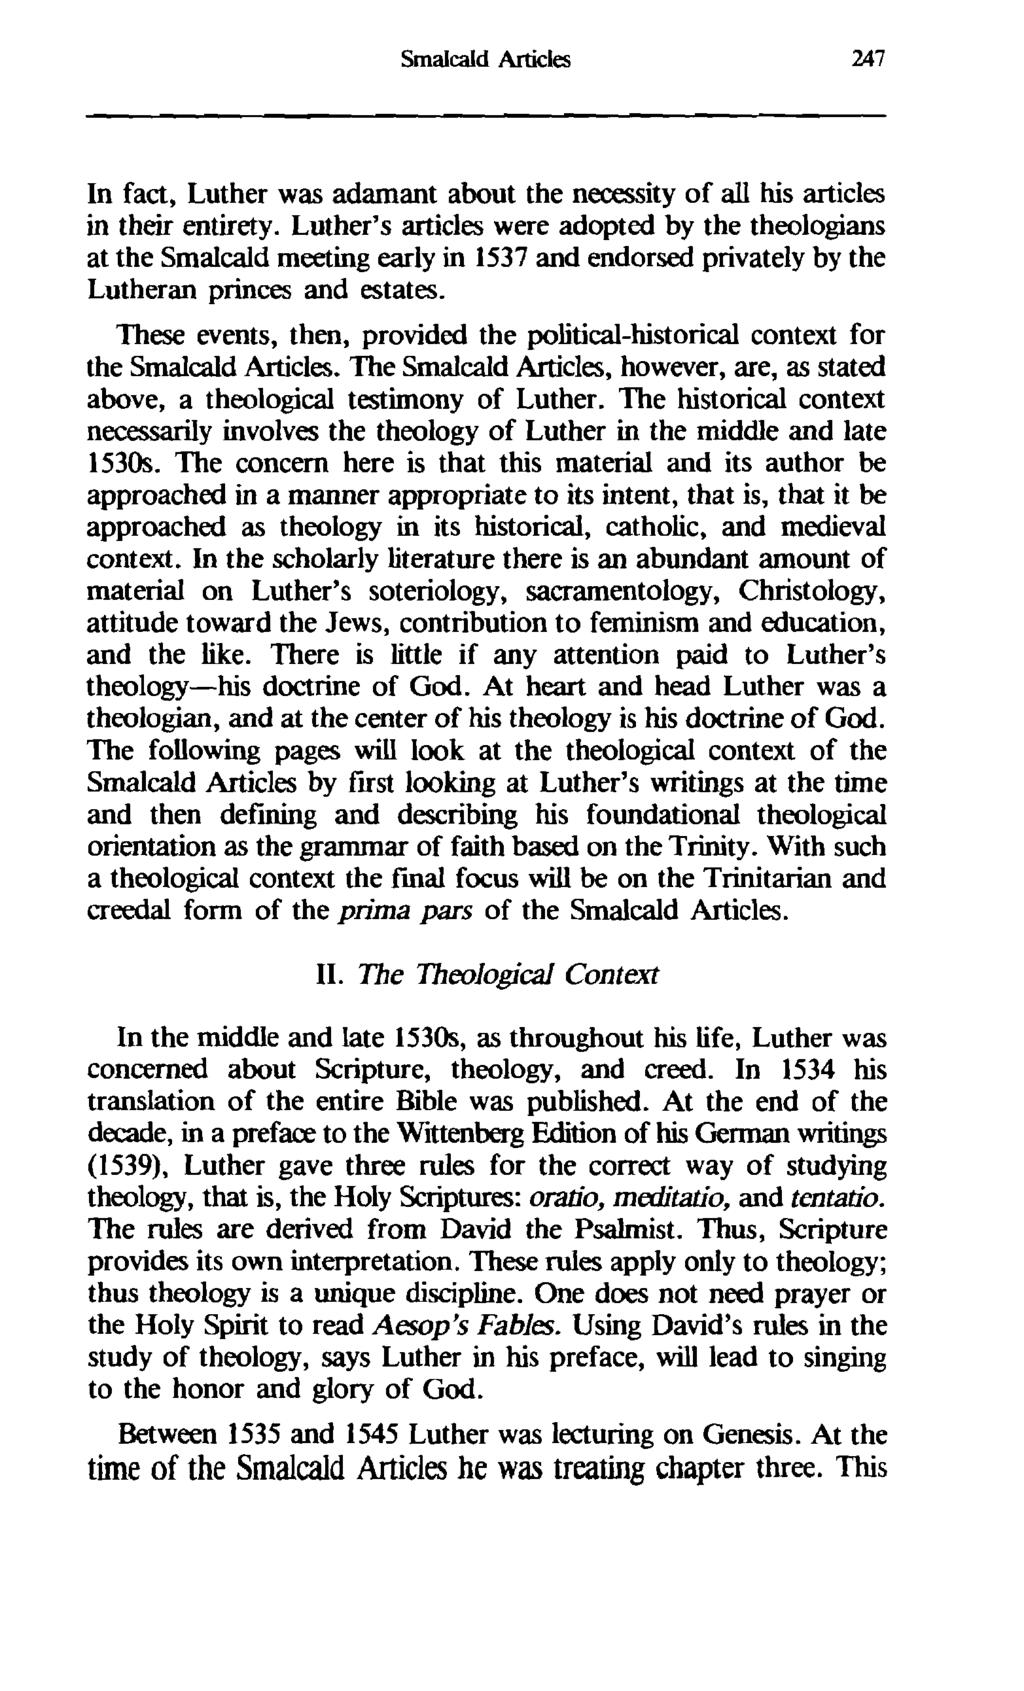 Smalcald Articles 247 In fact, Luther was adamant about the necessity of all his articles in their entirety.